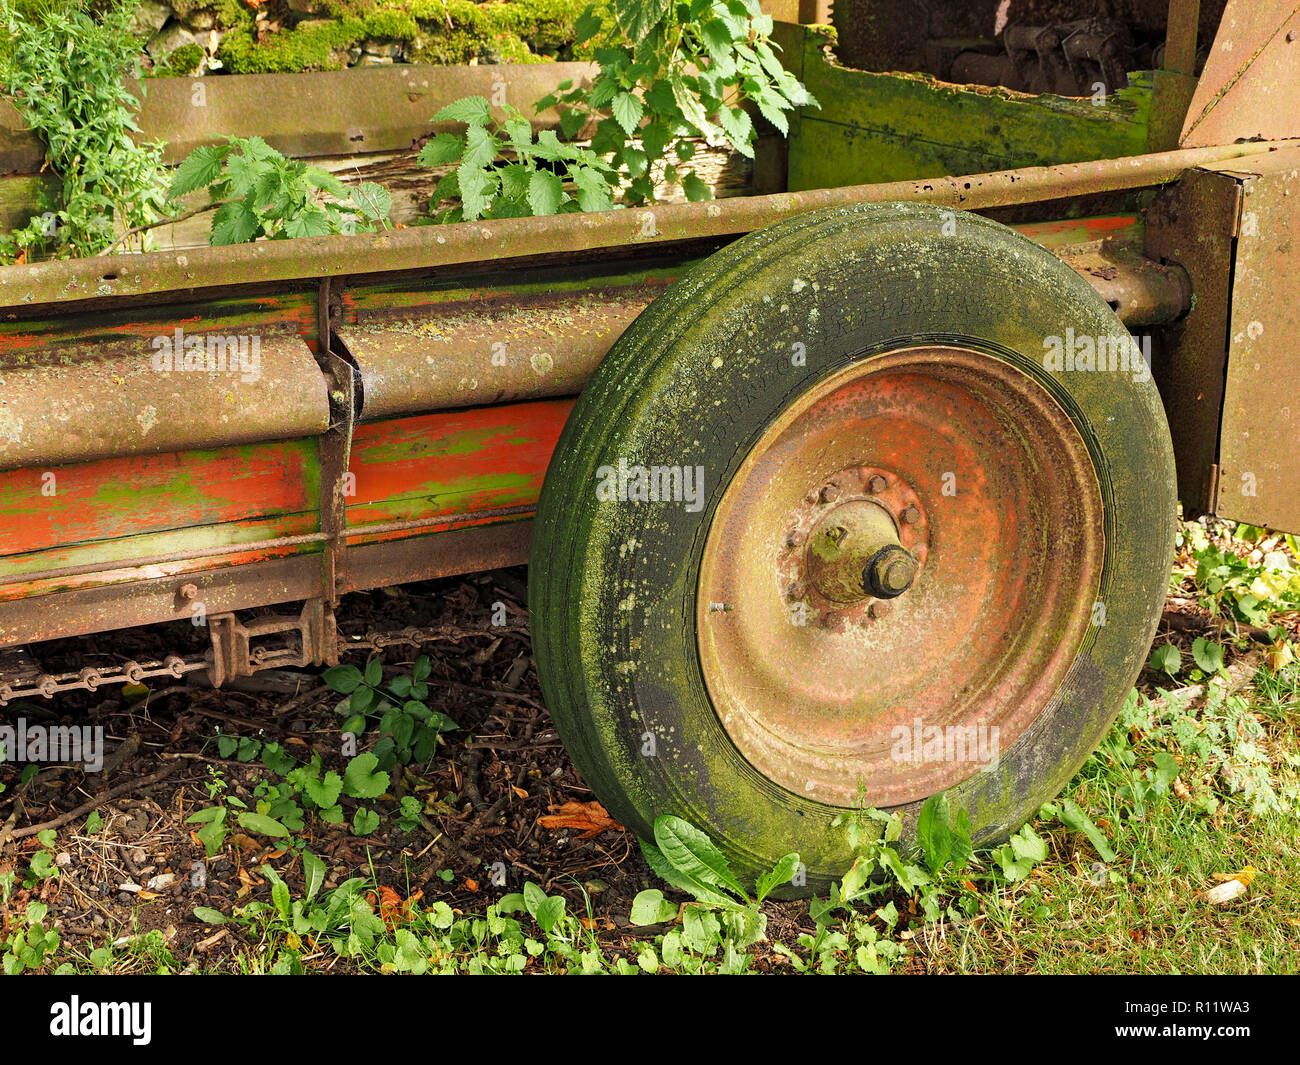 lichen and moss colonise the tyre and wheel of a long-abandoned farm trailer whilst nettles and weeds grow on the flatbed - Cumbria,England, UK Stock Photo